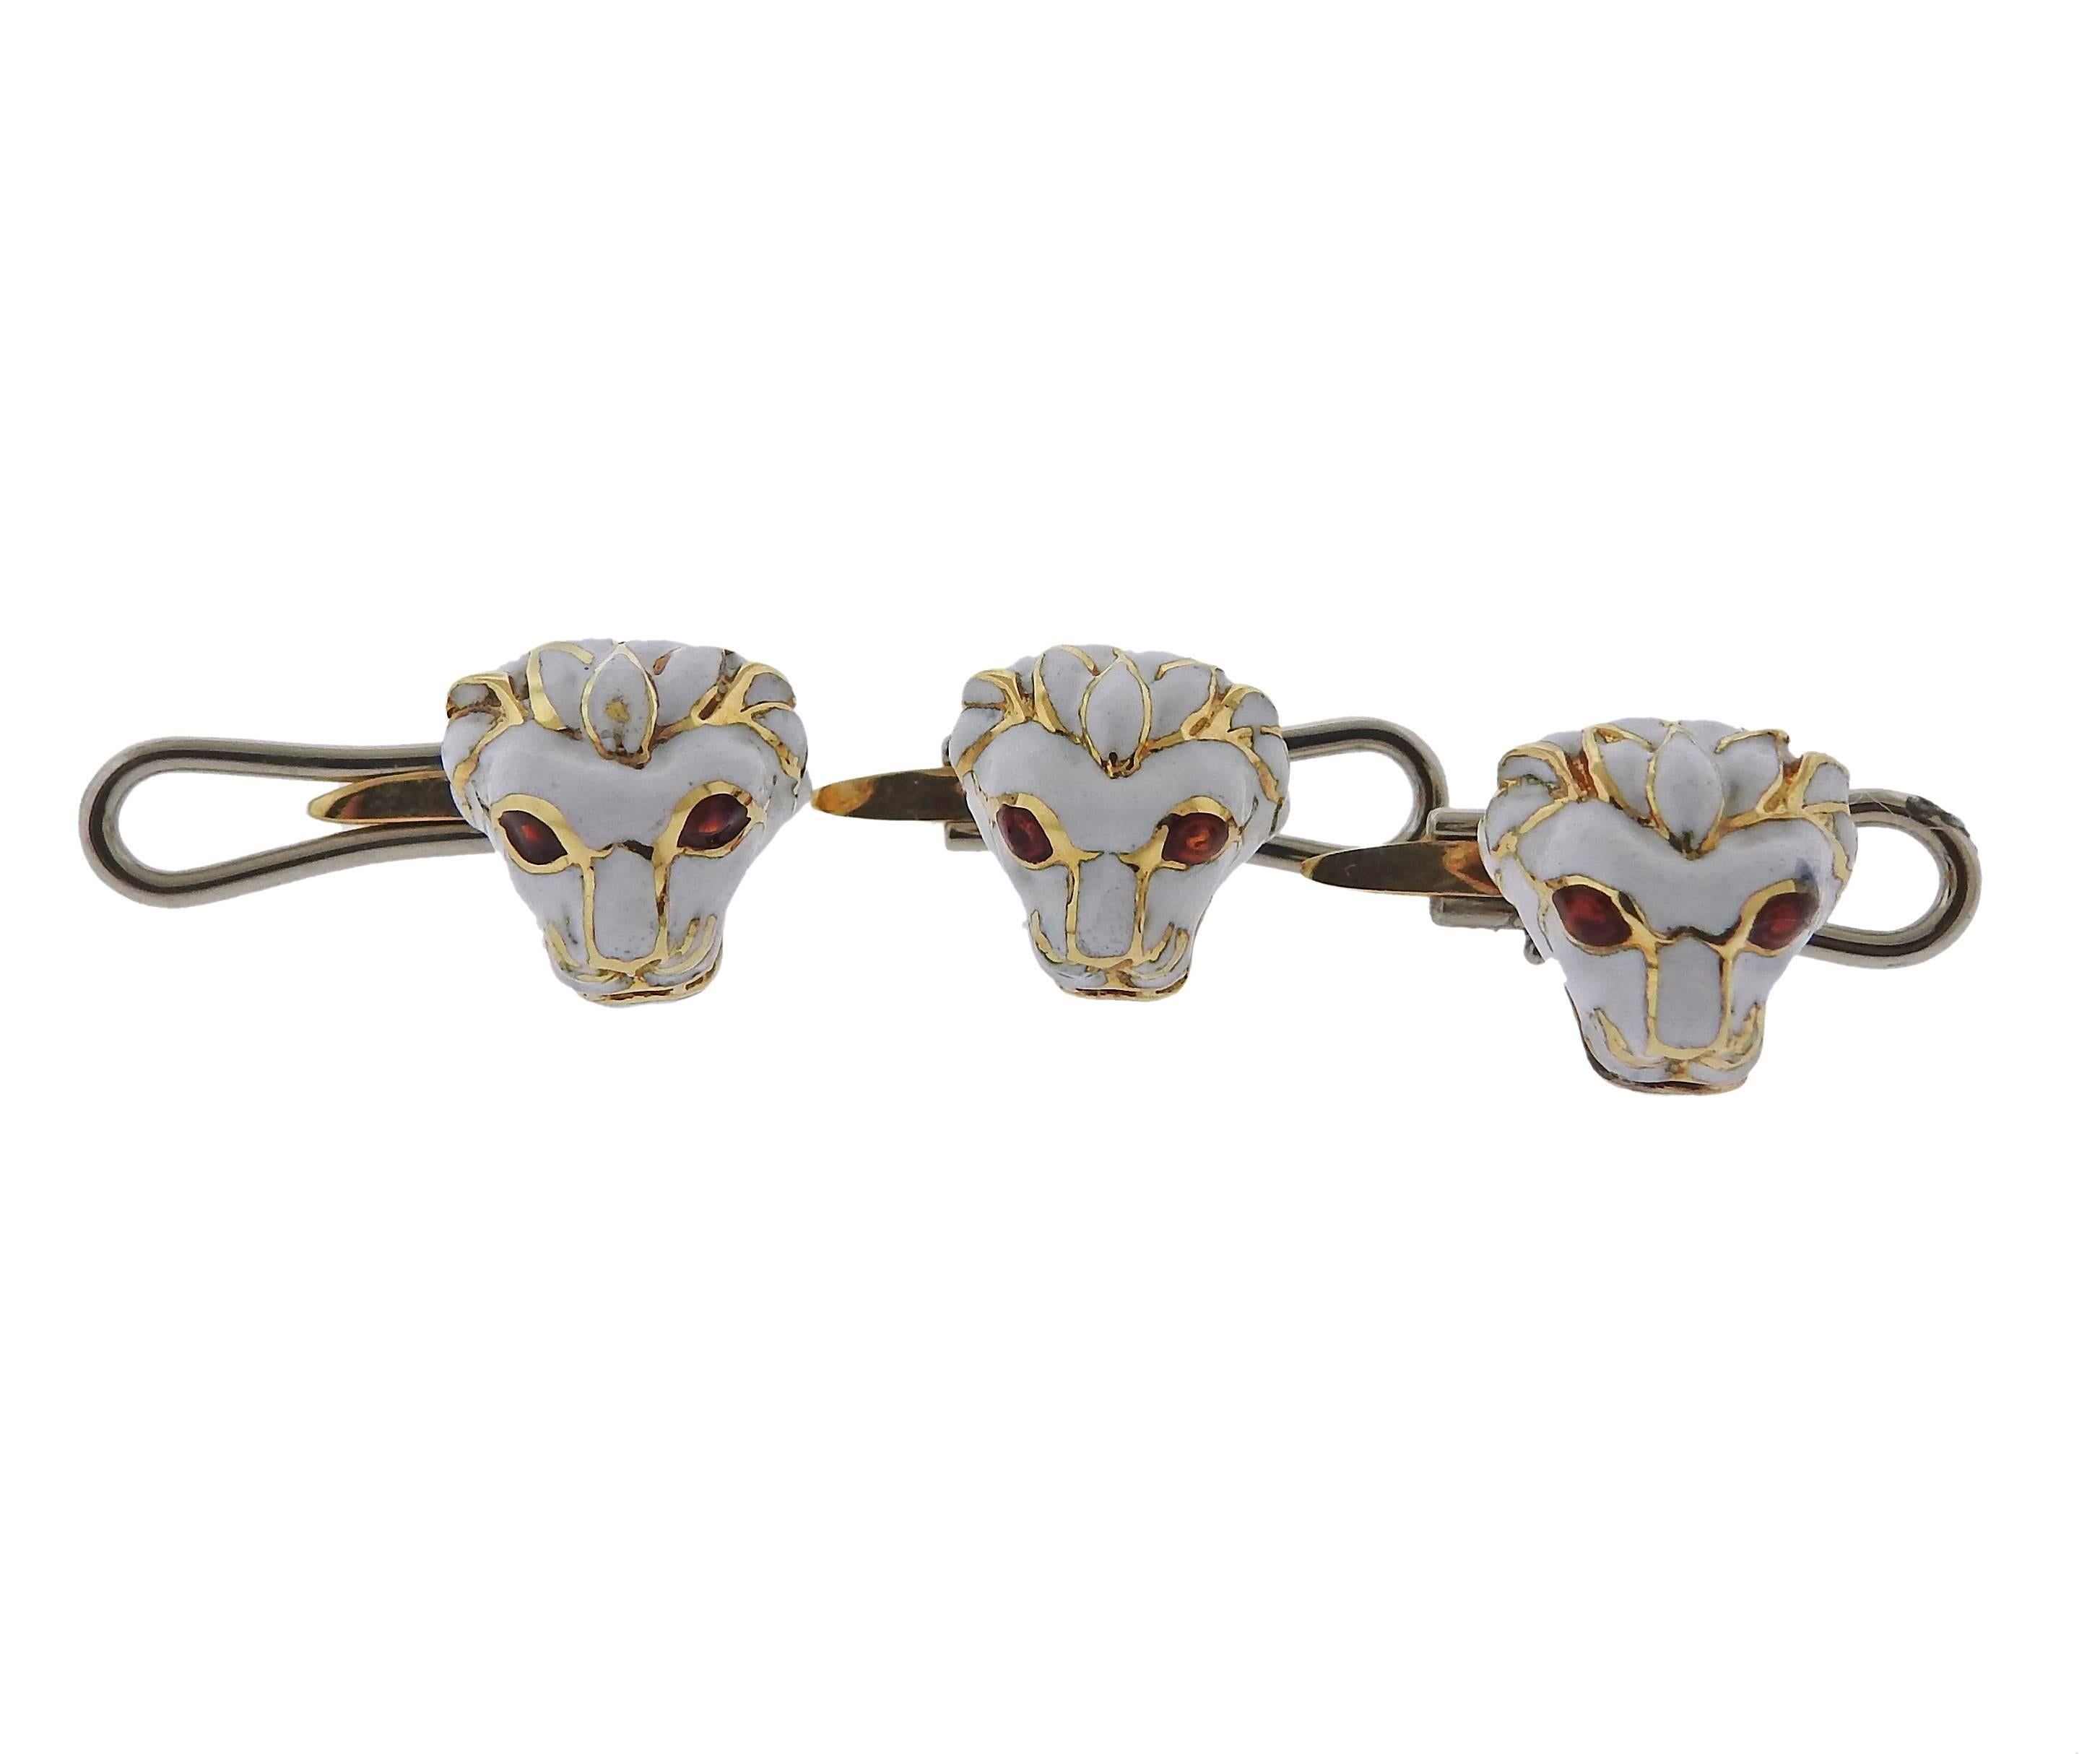 Iconic 18k gold cufflinks and studs set, crafted by David Webb, decorated with enamel, featuring lion heads. Cufflink top is 18mm x 17mm,  stud top - 12mm x 12mm. Marked: Webb 18k. Weight of the set - 38.5 grams 